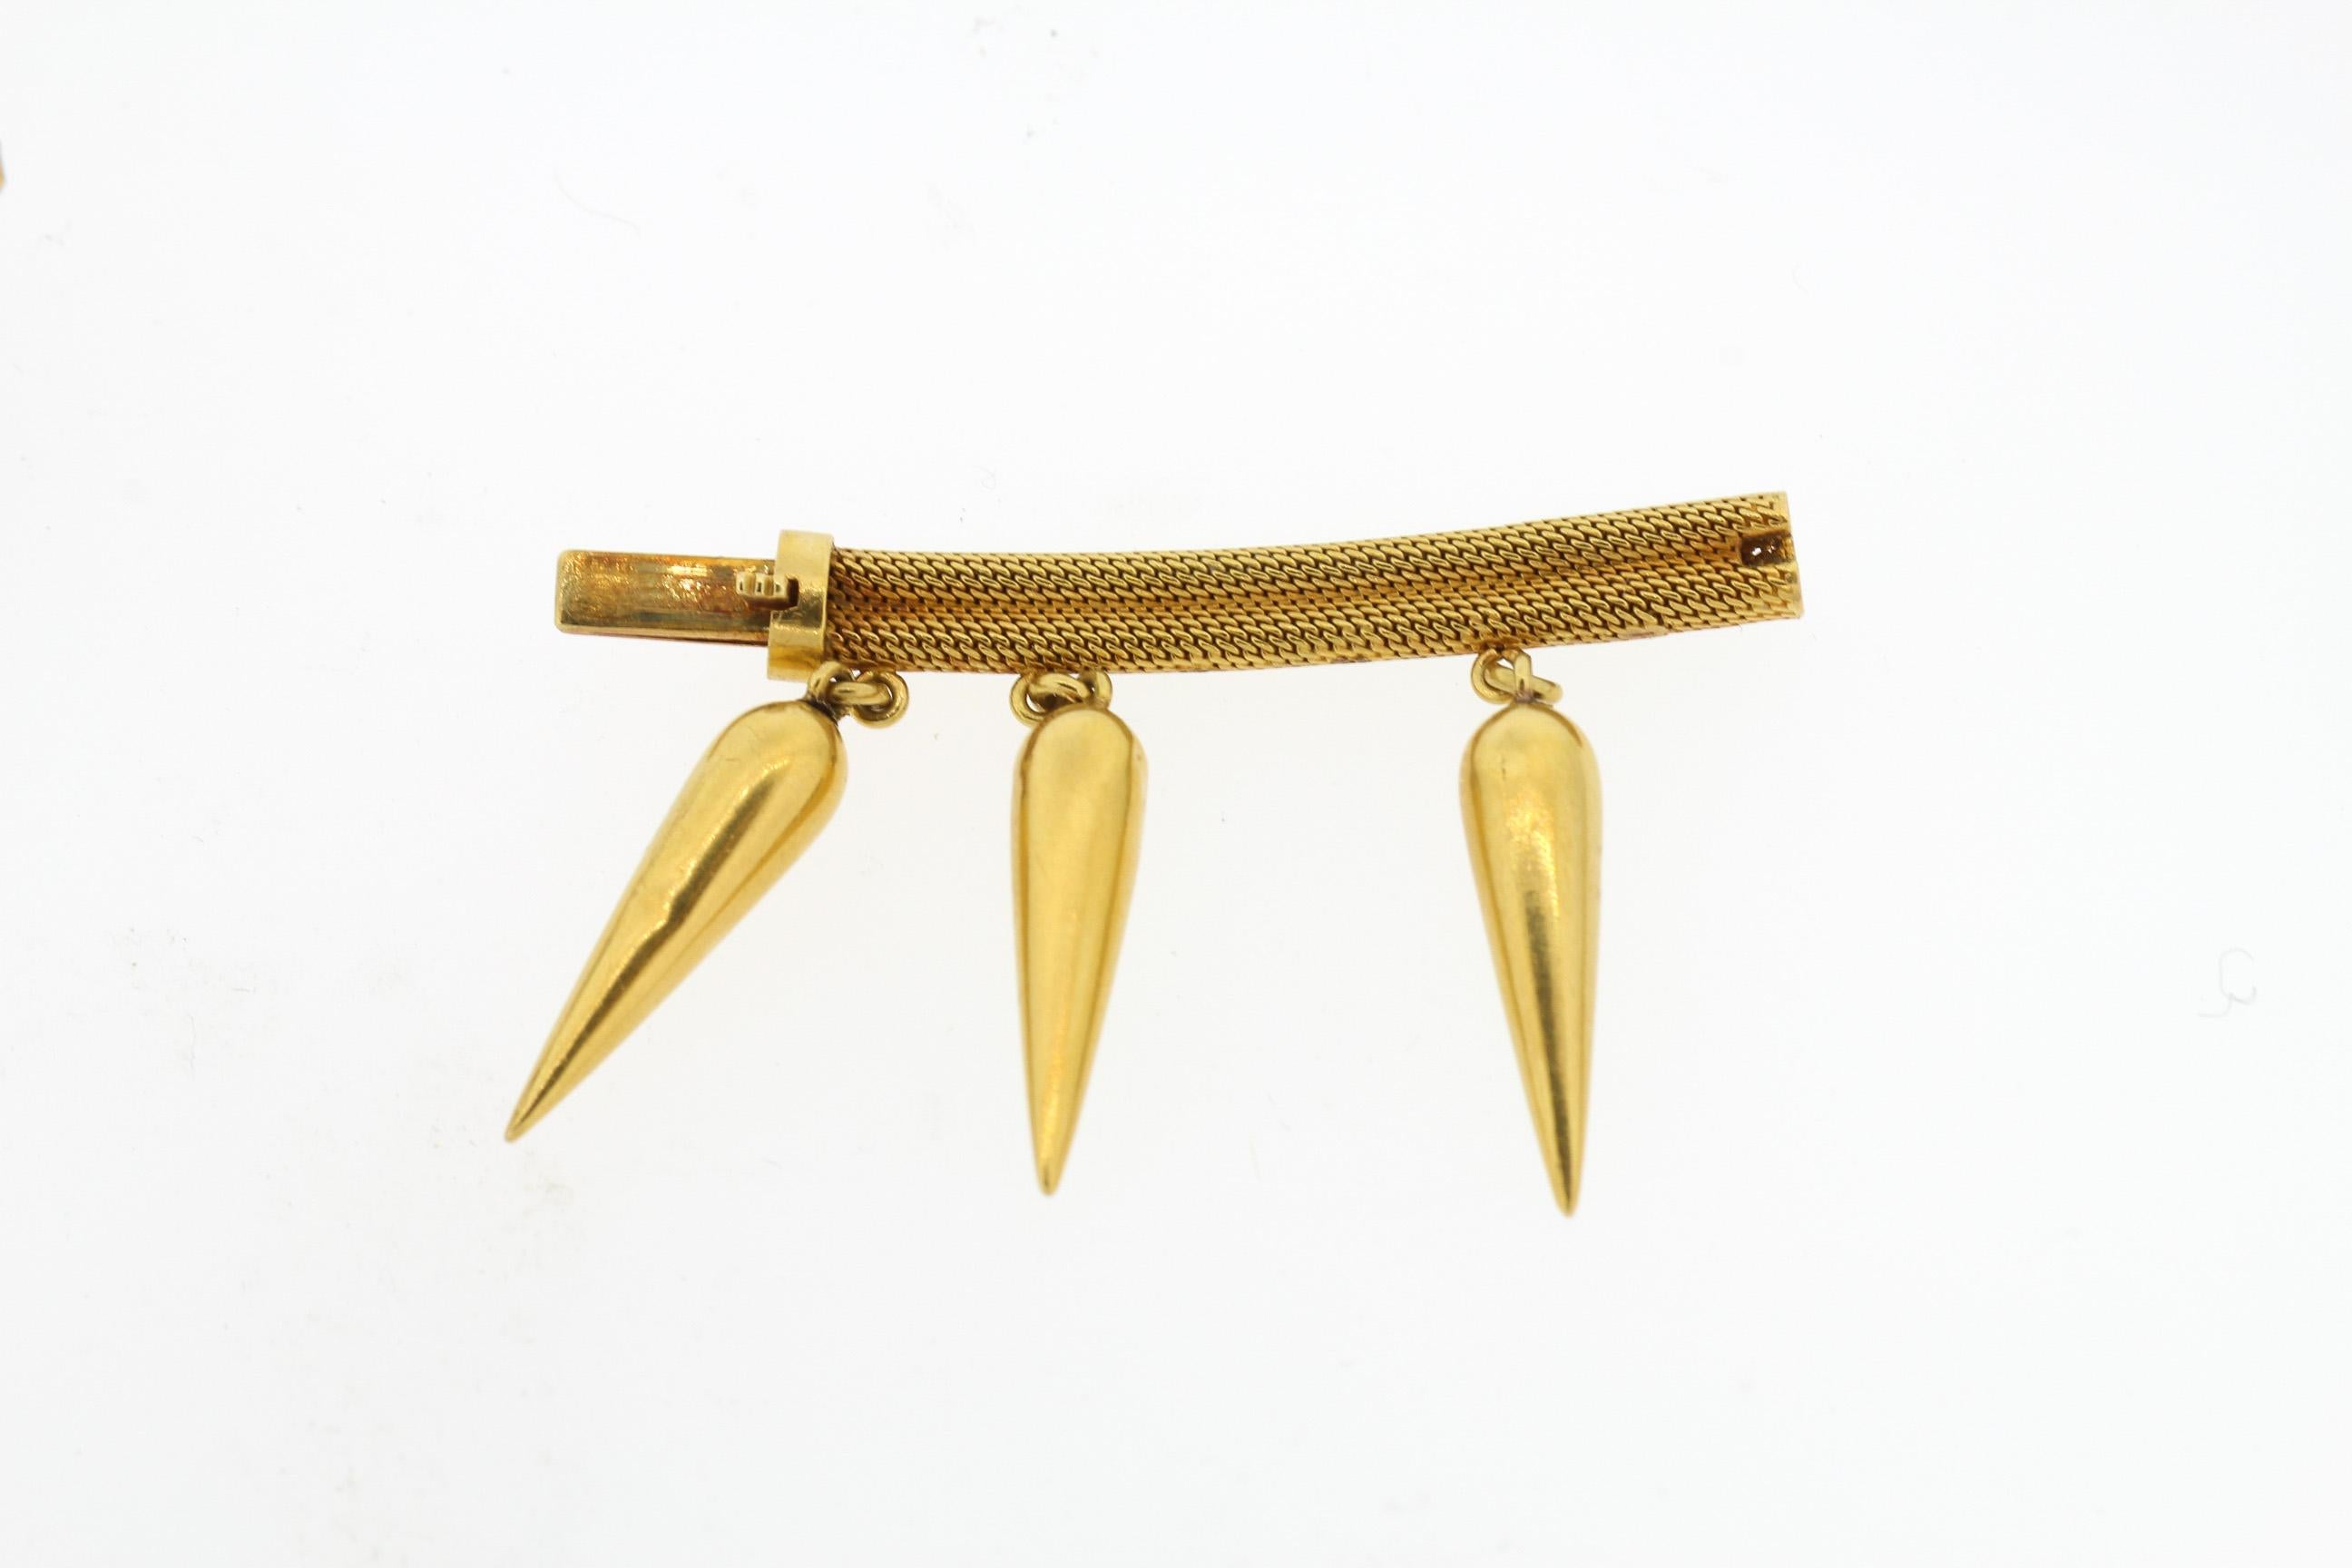 Gorgeous antique Etruscan Revival 18k gold dart fringe necklace circa 1880. This necklace has such a beautiful buttery gold hue. The necklace is made with an extension, so it is 13 inches long without the extension and 14 inches long with it. We